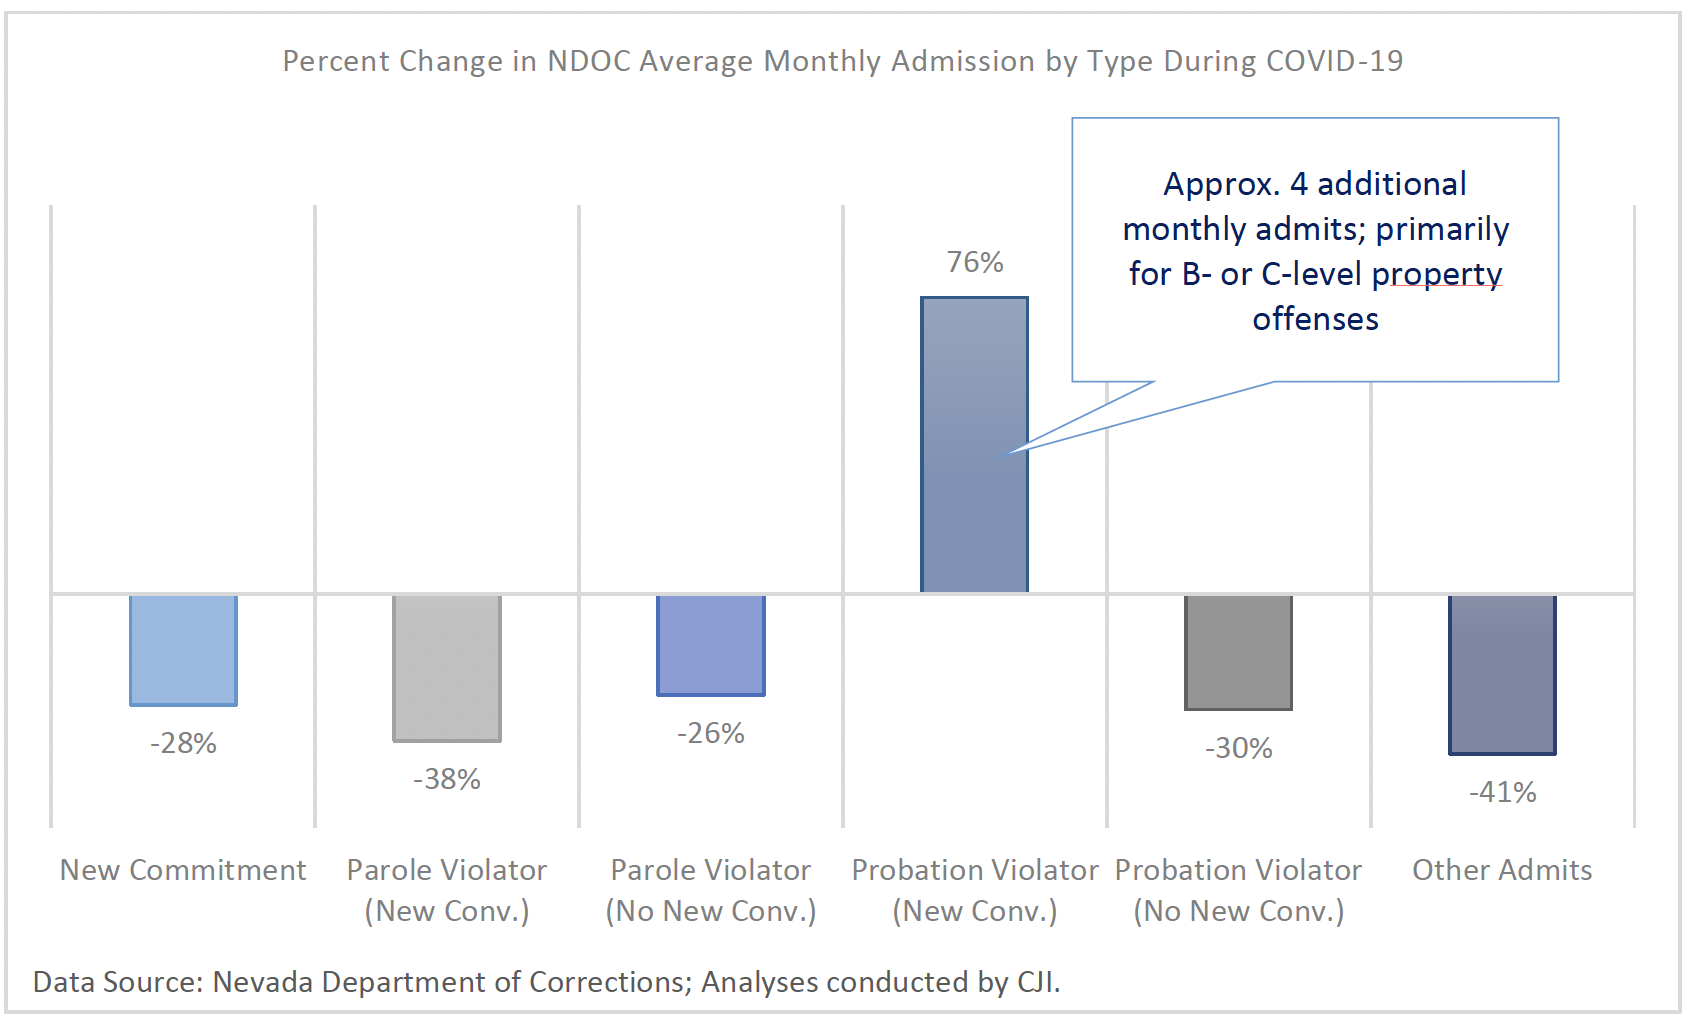 A view of prison admissions declined across nearly all admissions types during COVID-19 